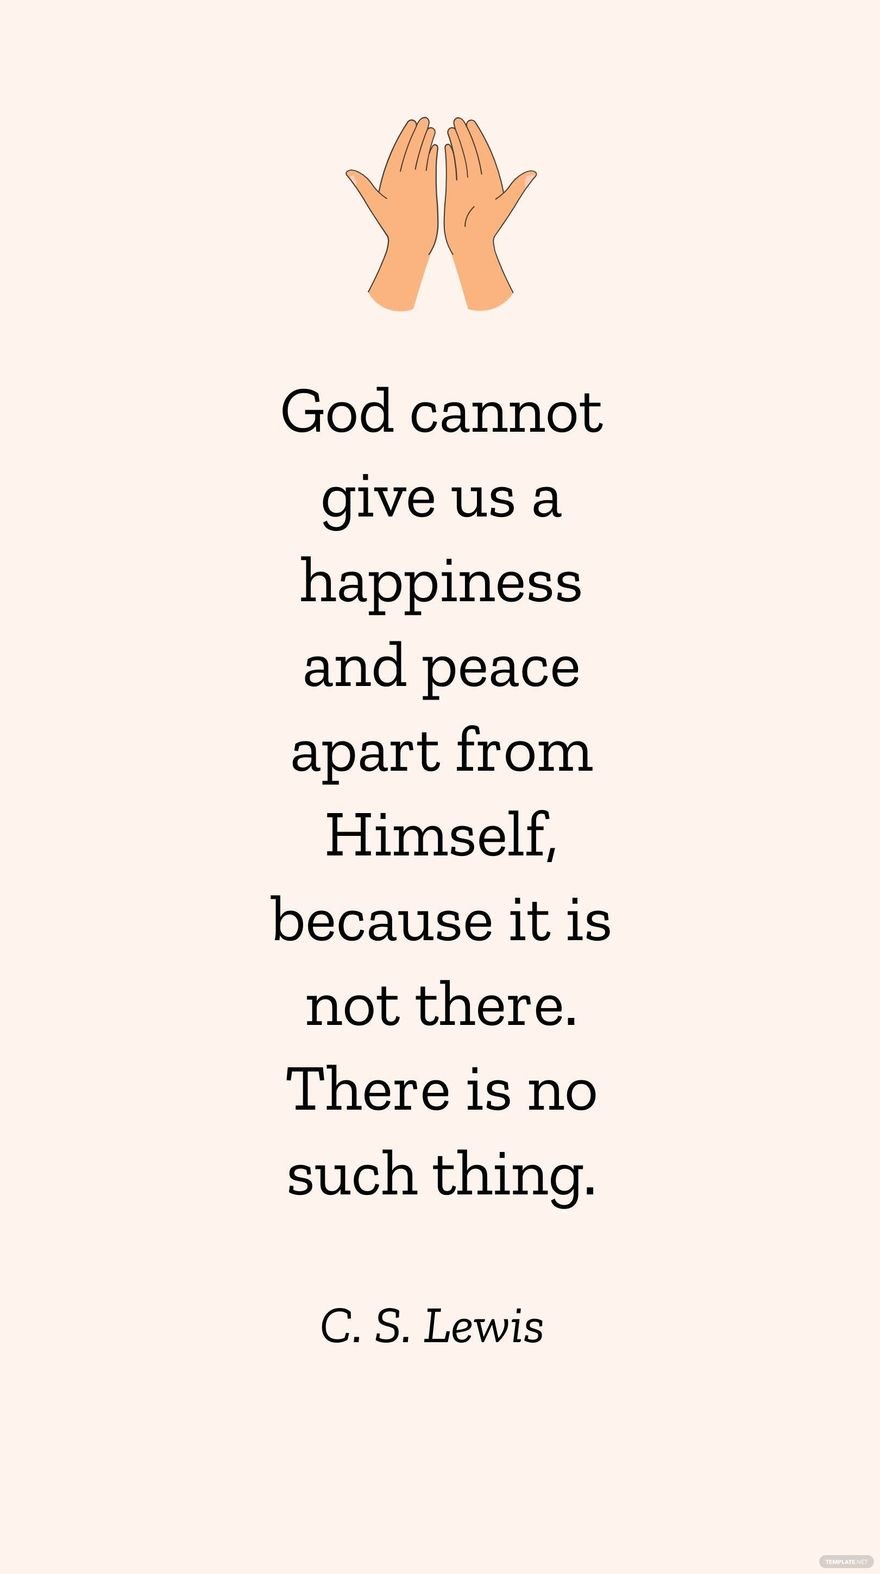 C. S. Lewis - God cannot give us a happiness and peace apart from Himself, because it is not there. There is no such thing. 